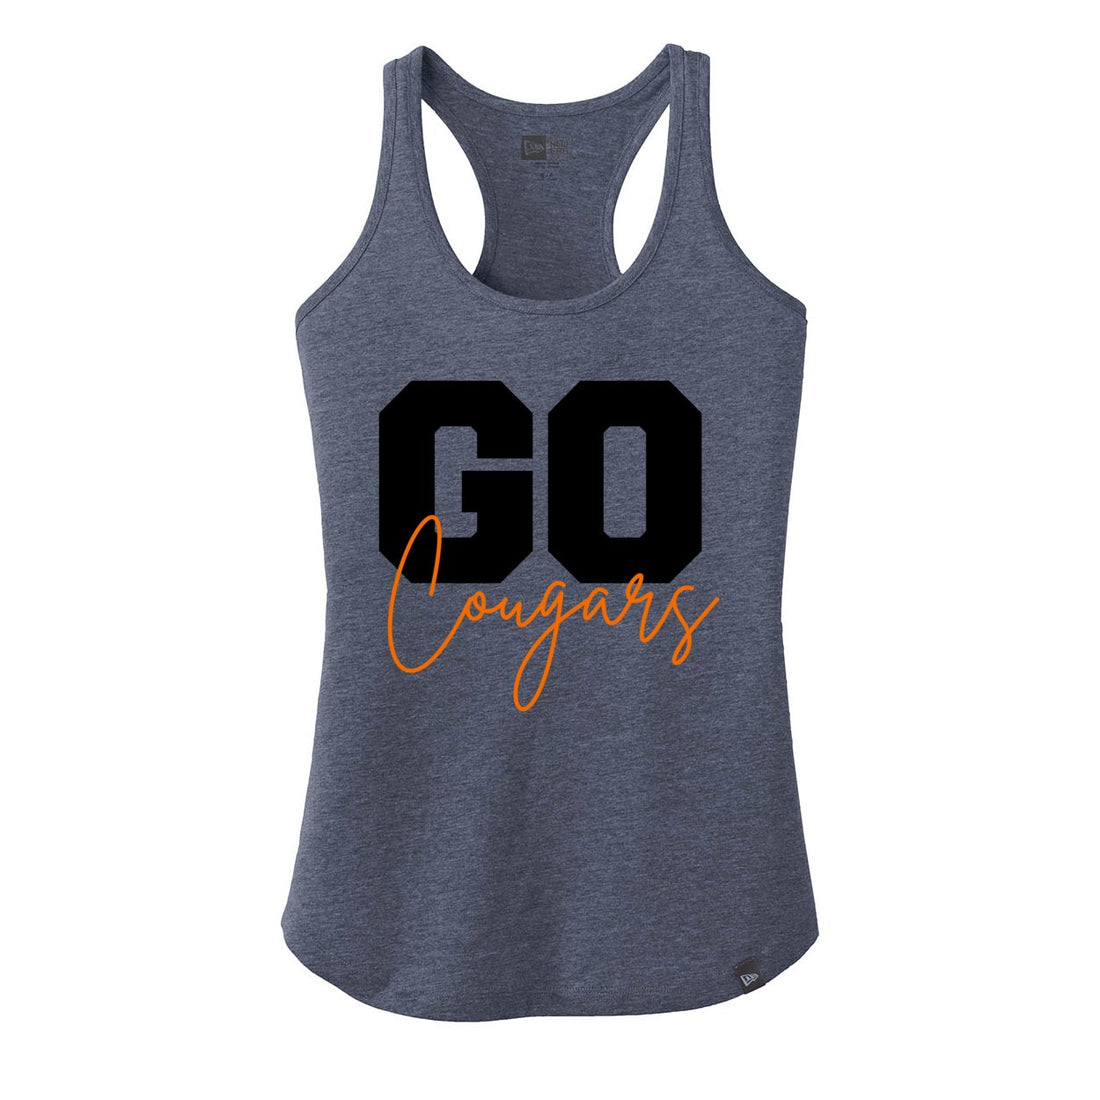 Go Cougars Racerback Tank - Tank Tops - Positively Sassy - Go Cougars Racerback Tank